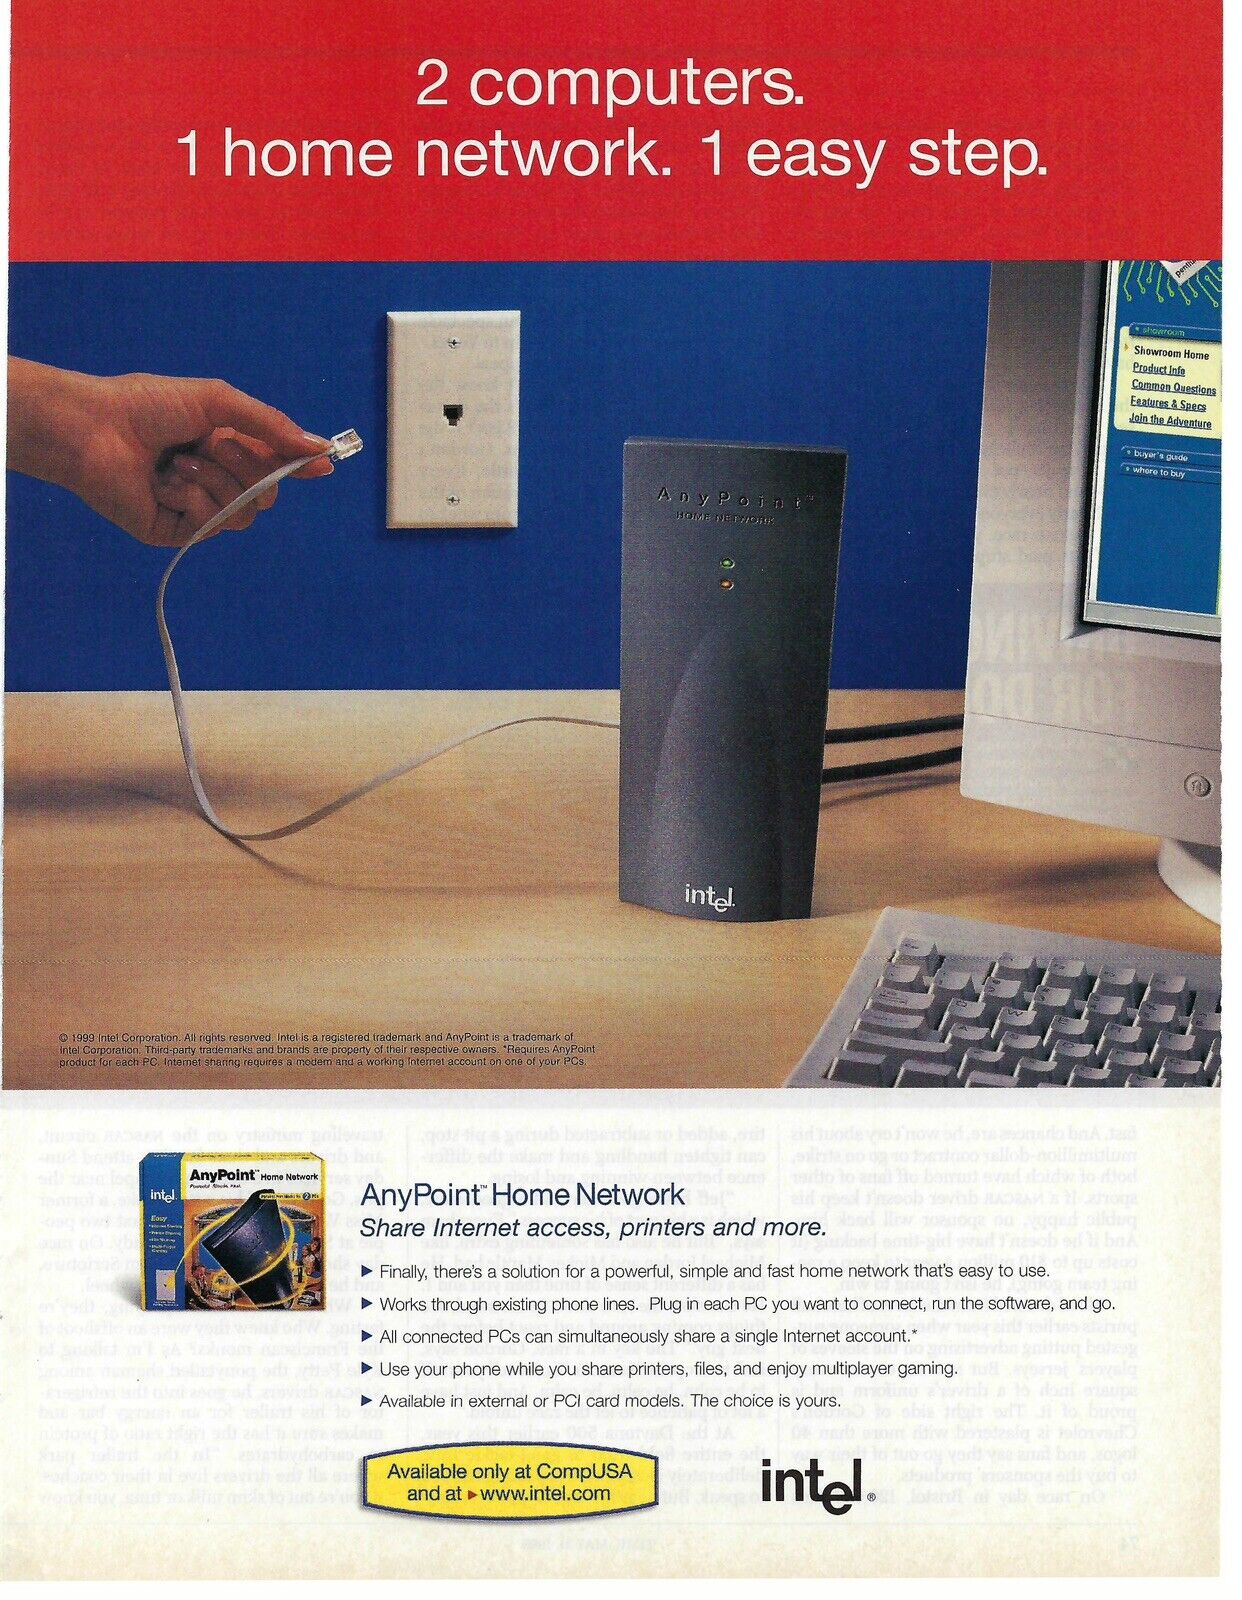 1999 Intel AnyPoint Home Network 2 Computers Vintage Magazine Print Ad/Poster